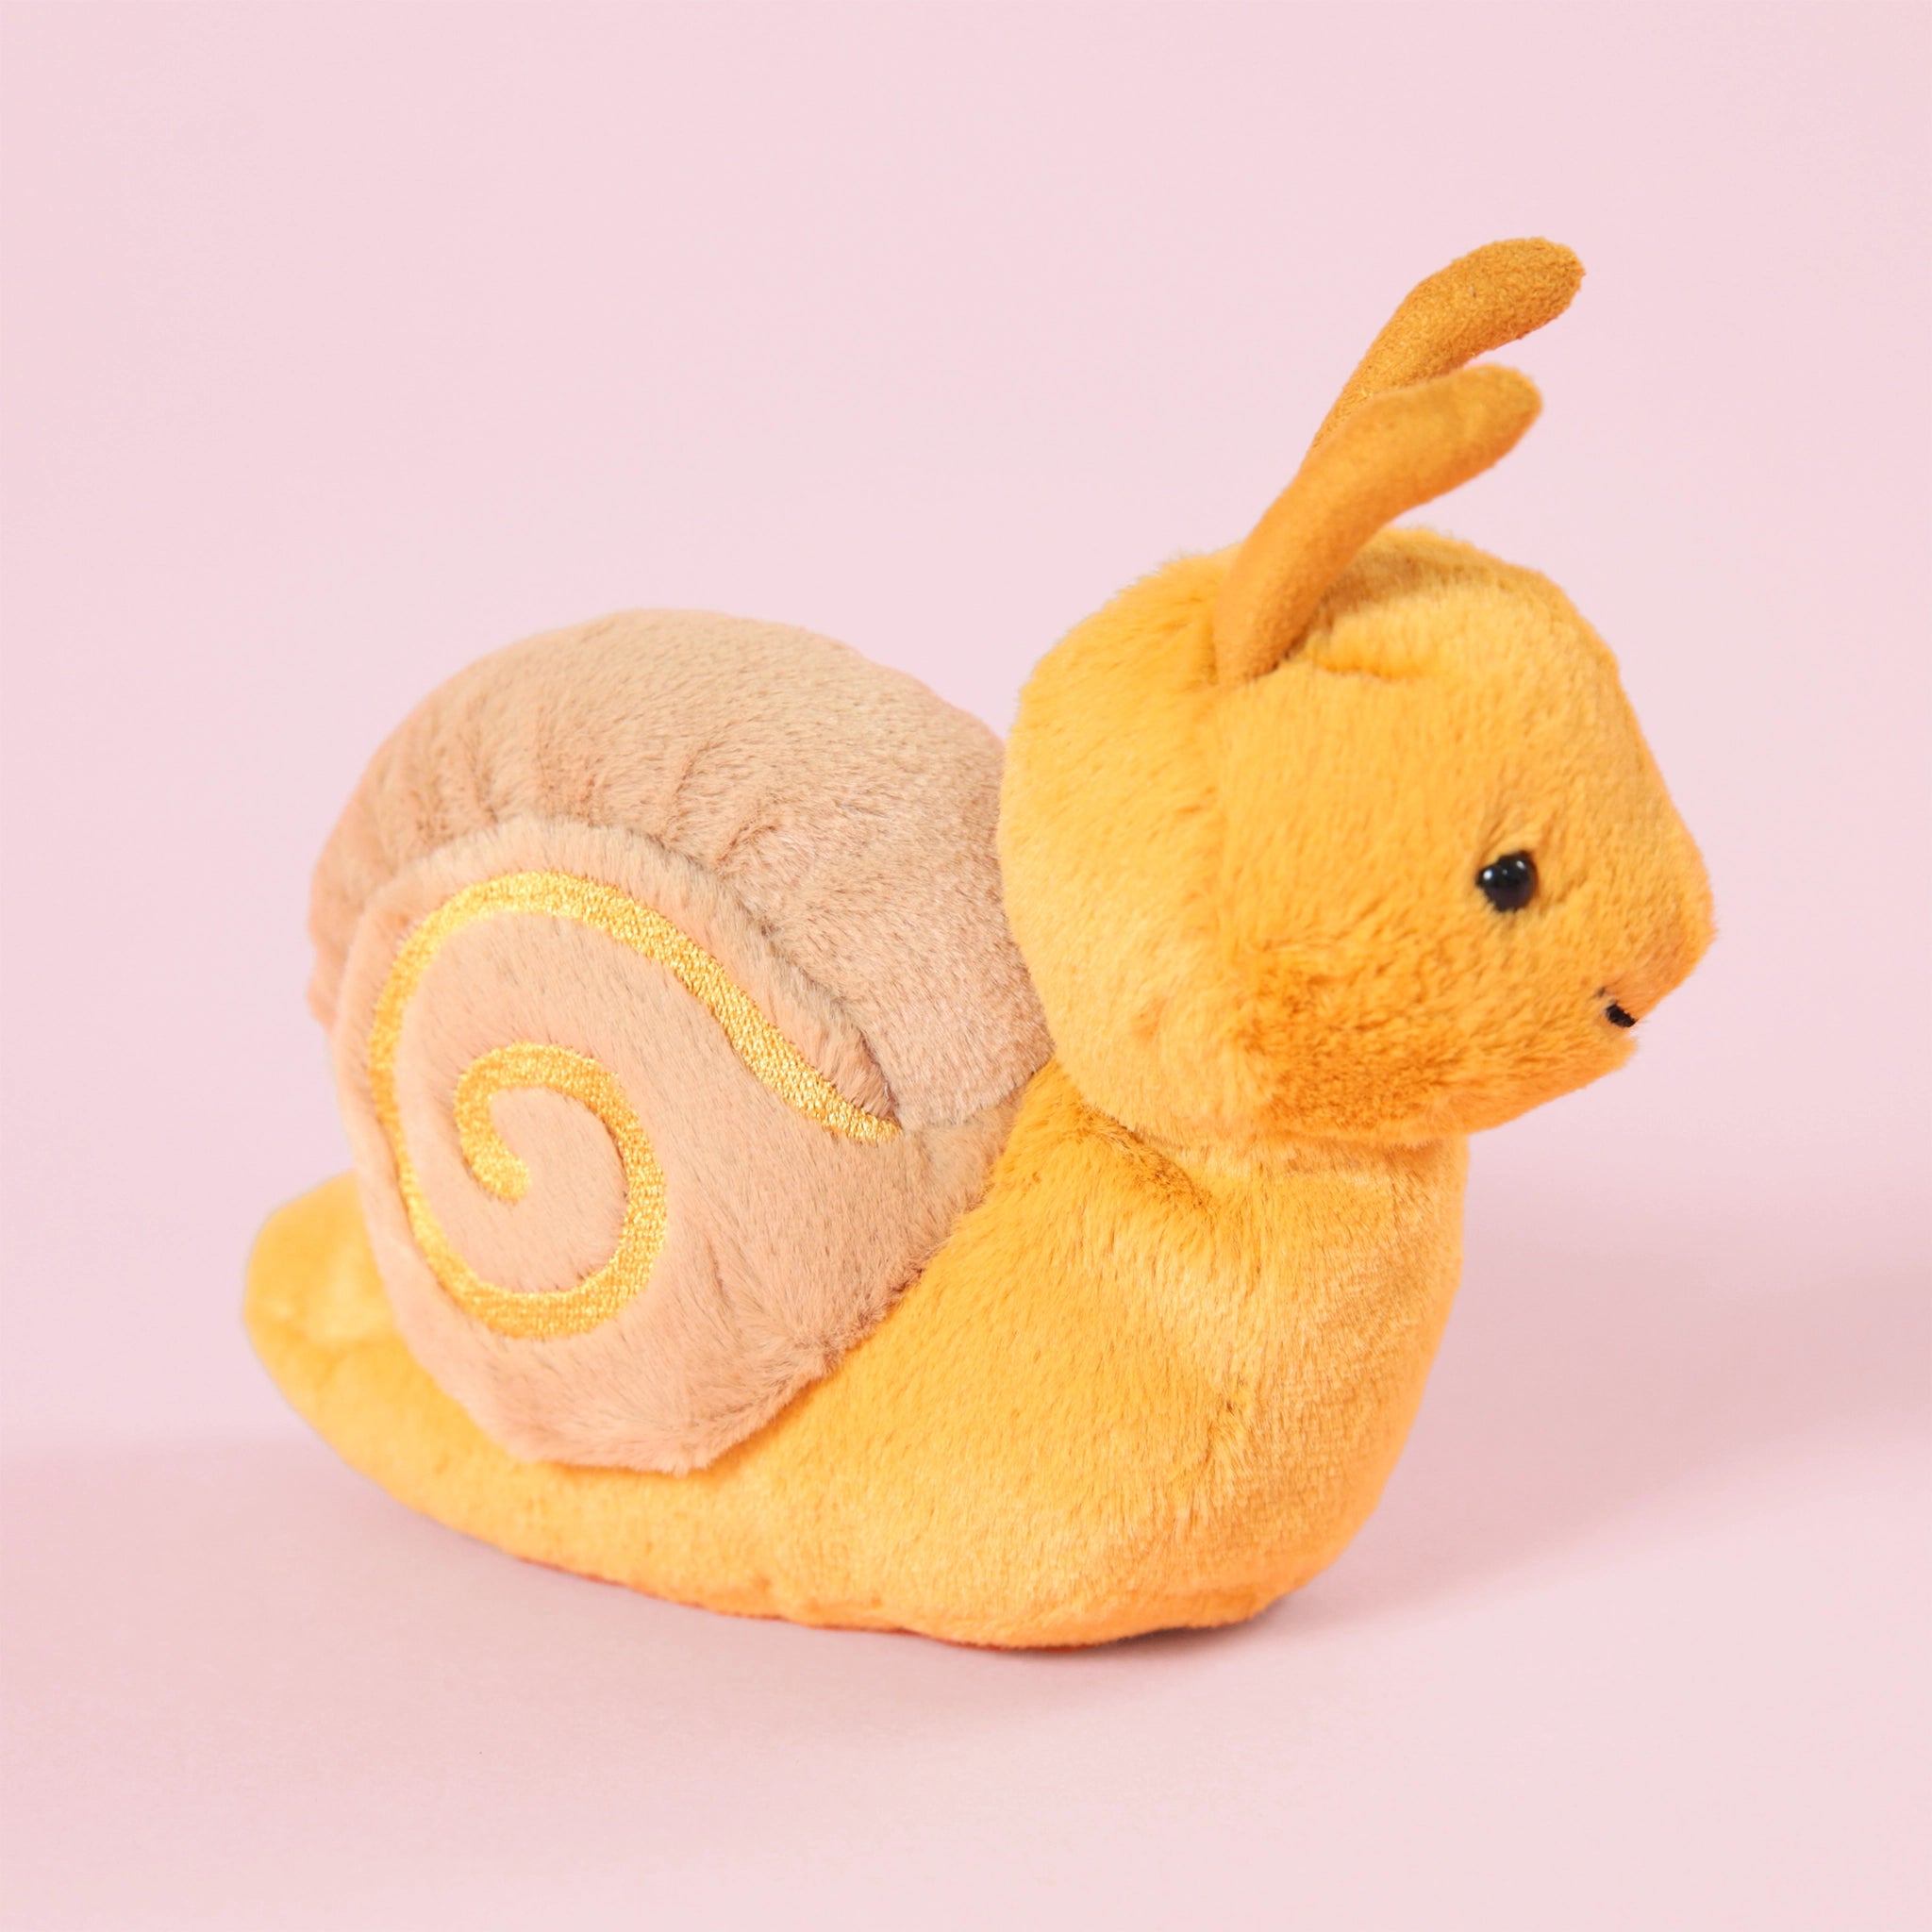 A yellow snail stuffed animal with a tan shell and a swirl design in the center.